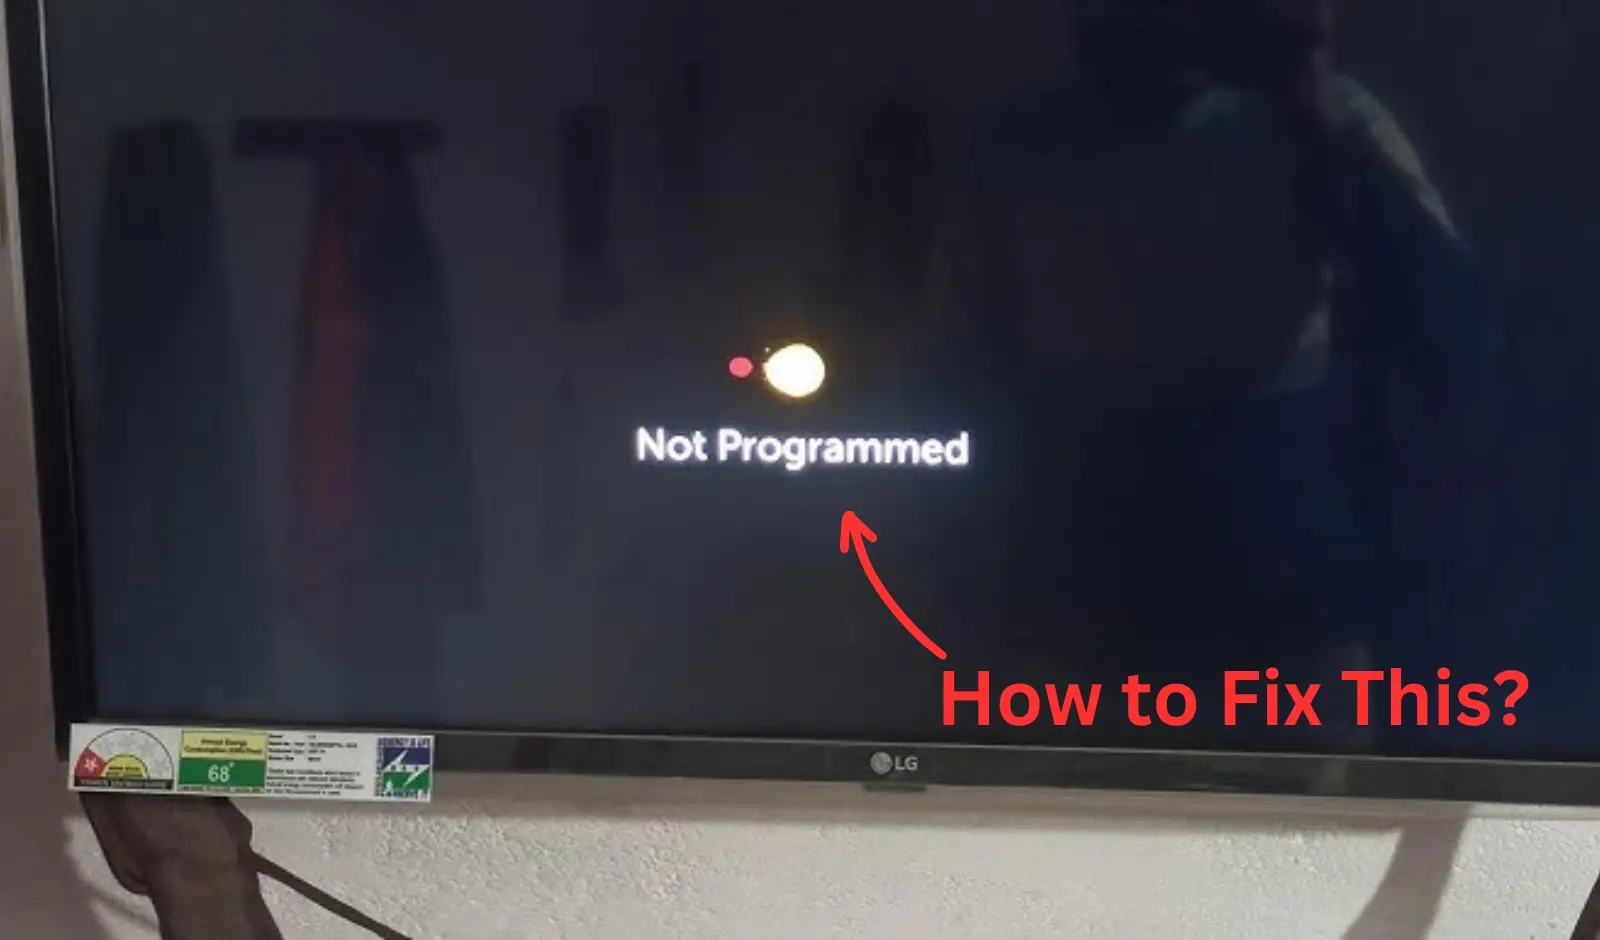 LG TV Not Programmed Message How To Fix This